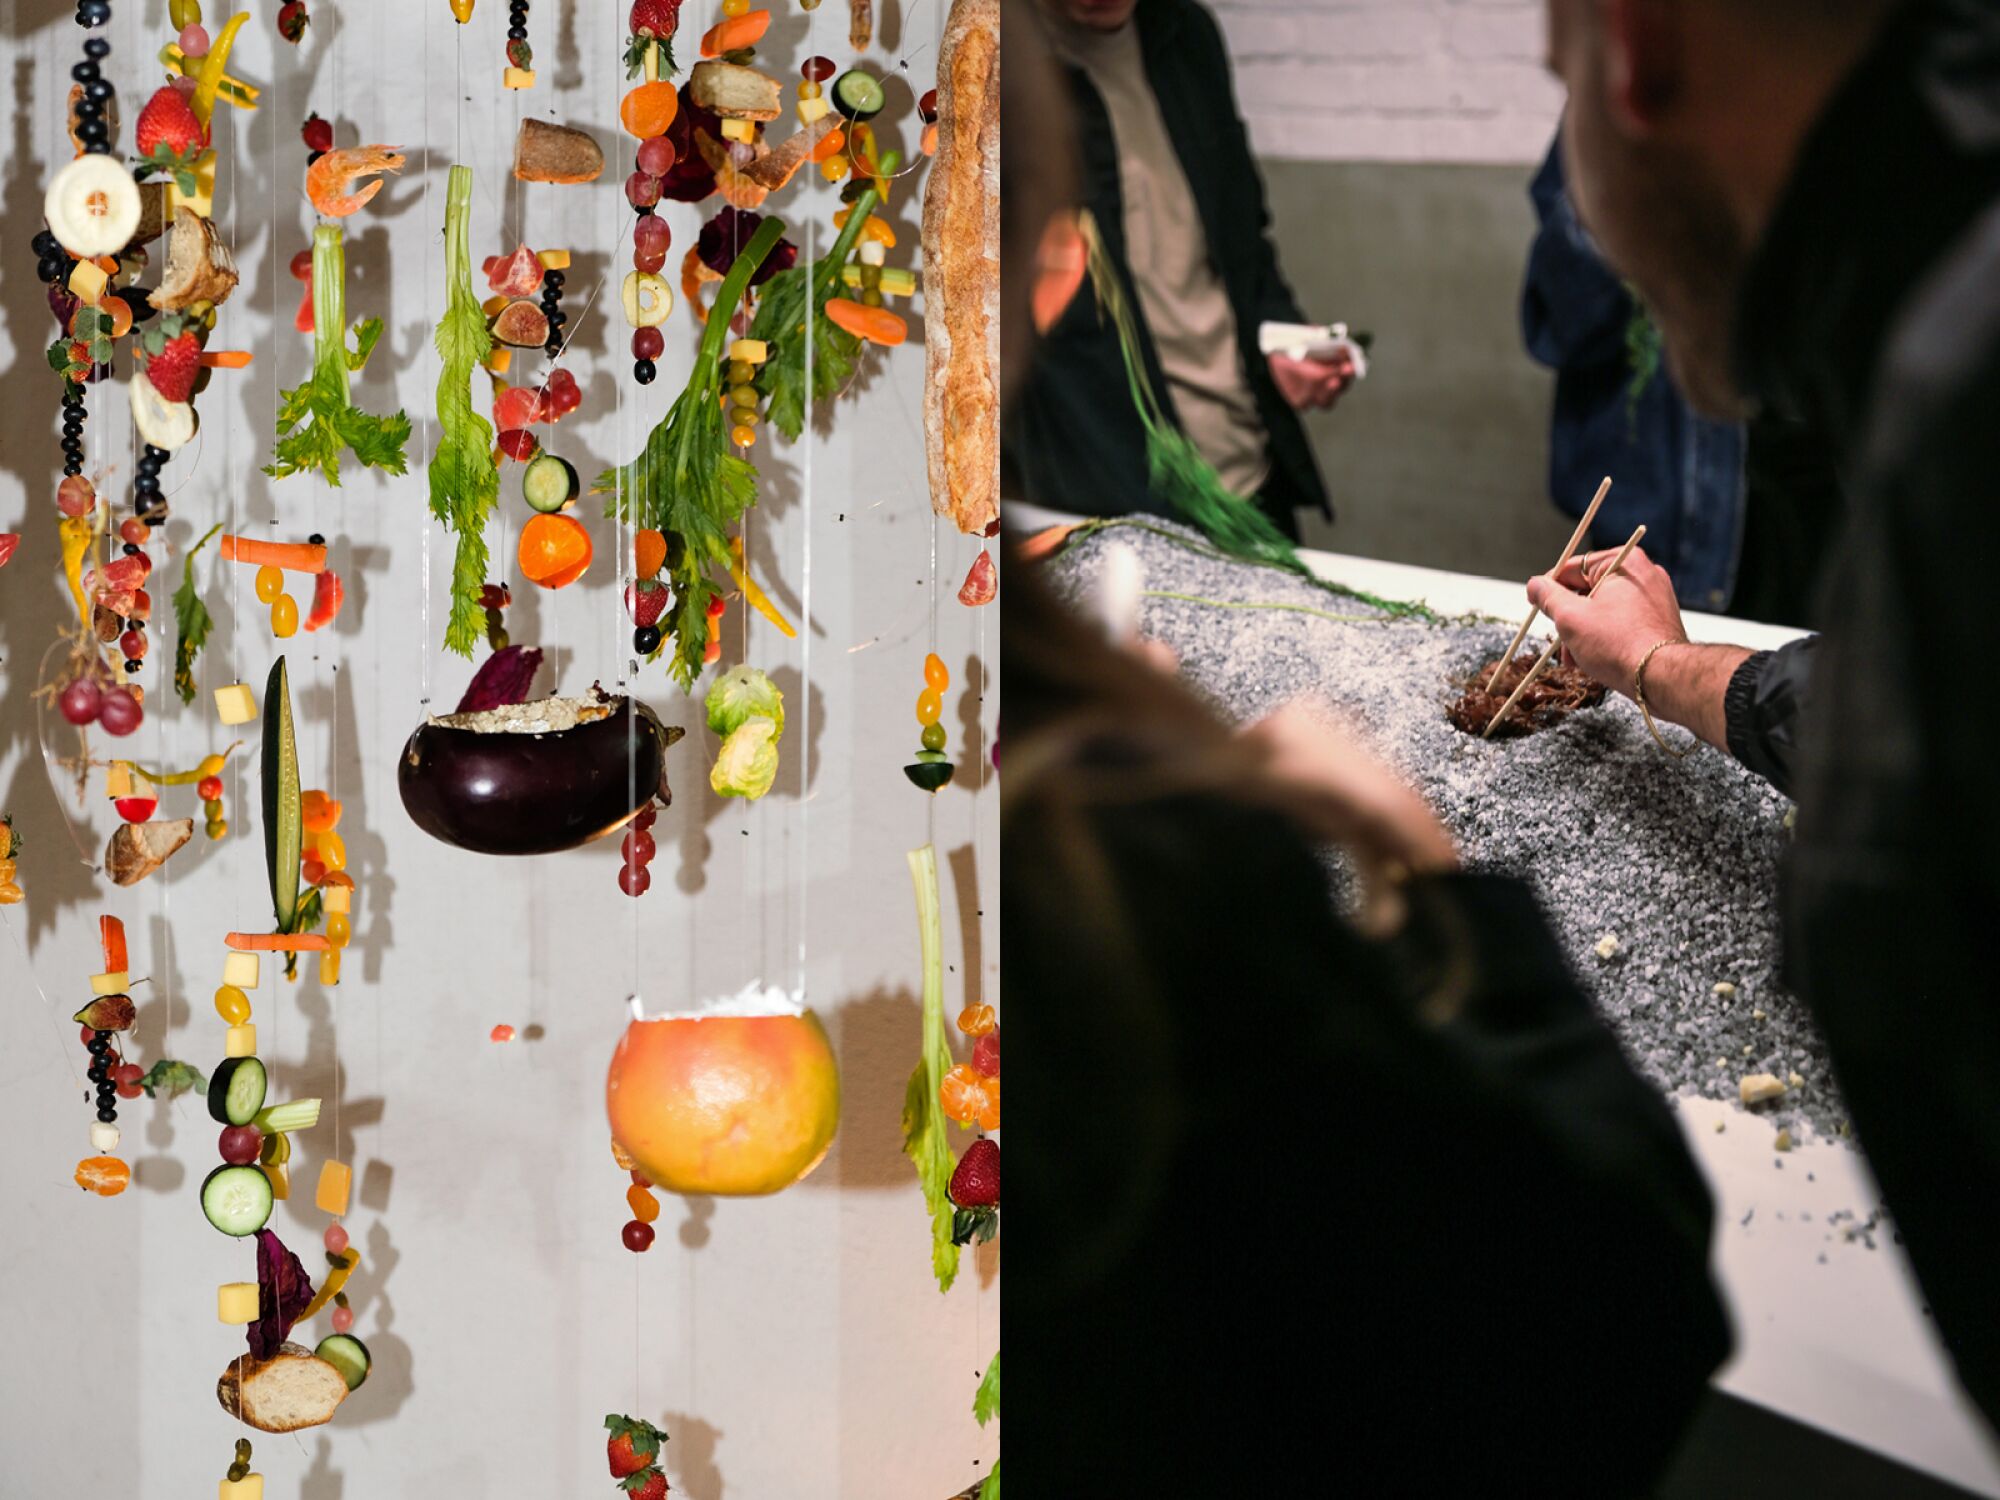 Images next to a hanging food installation and a person reaching chopsticks into a volcano-like display